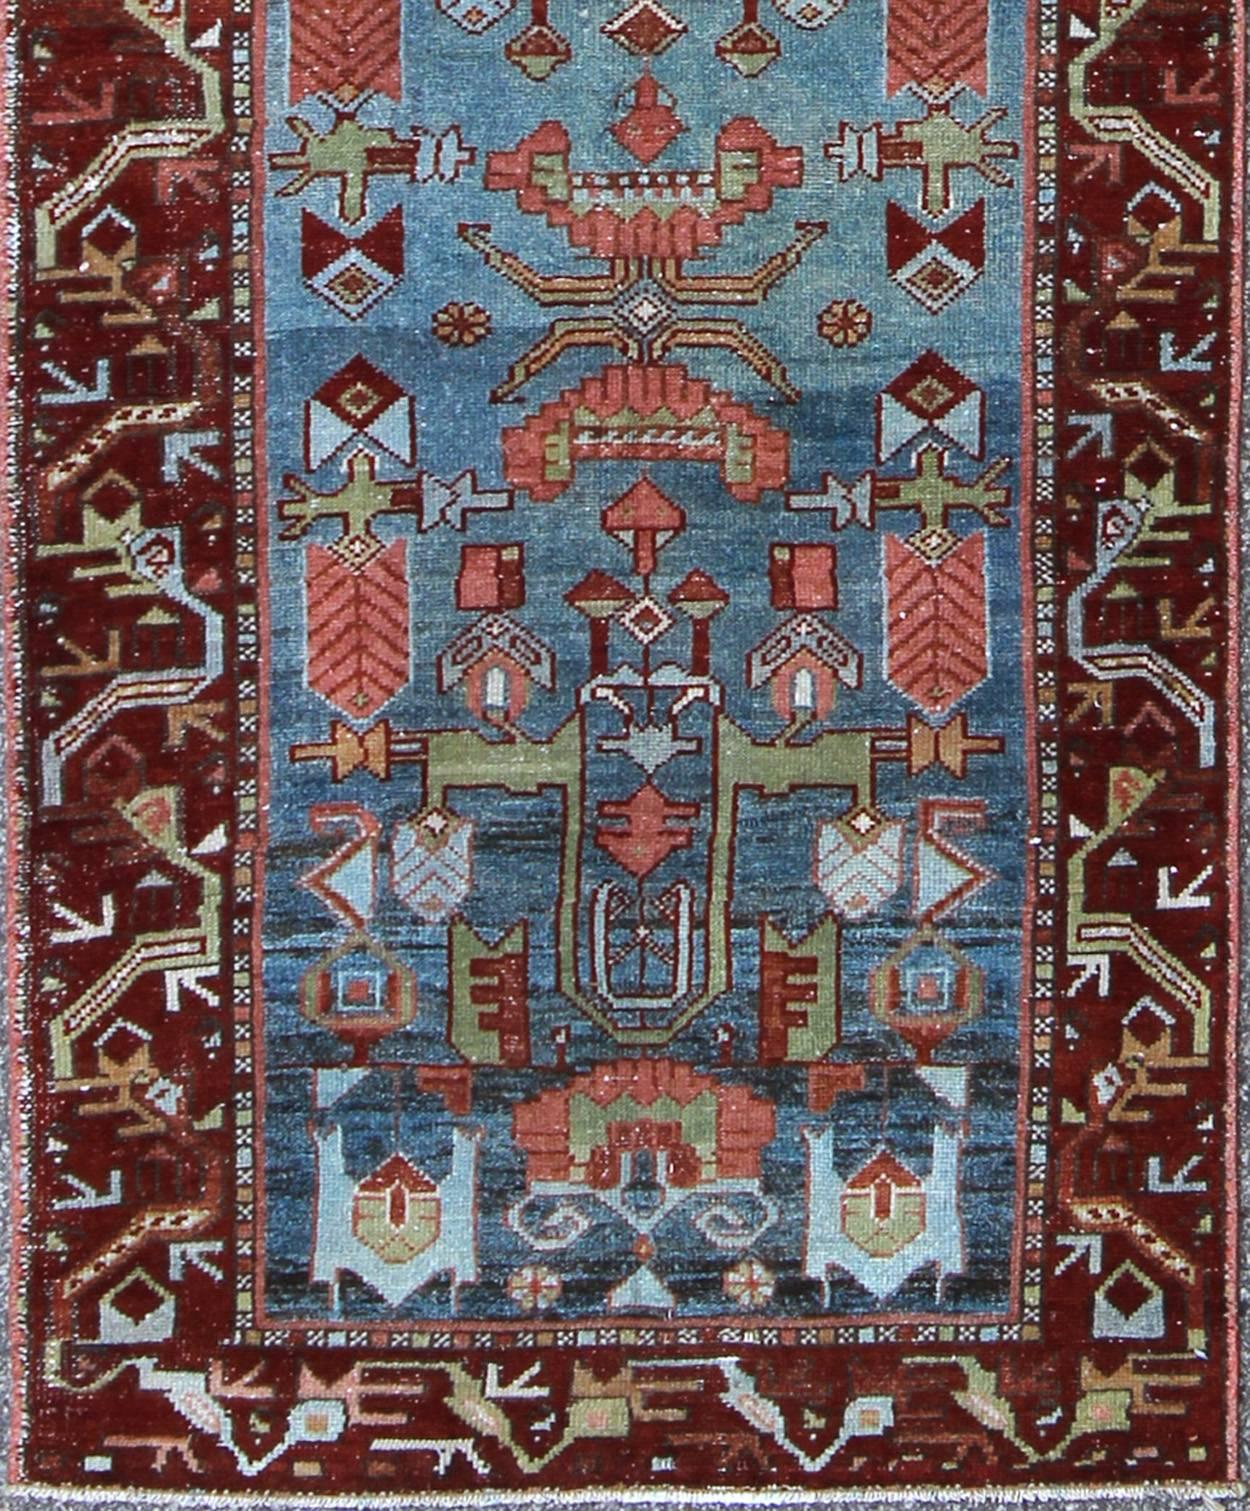 This magnificent antique Persian Malayer runner, of an impressive size, bears a beautiful, all-over sub geometric design paired with a delightful palette of various shades of medium blue, deep red, rust, light blue, and green. The central field is